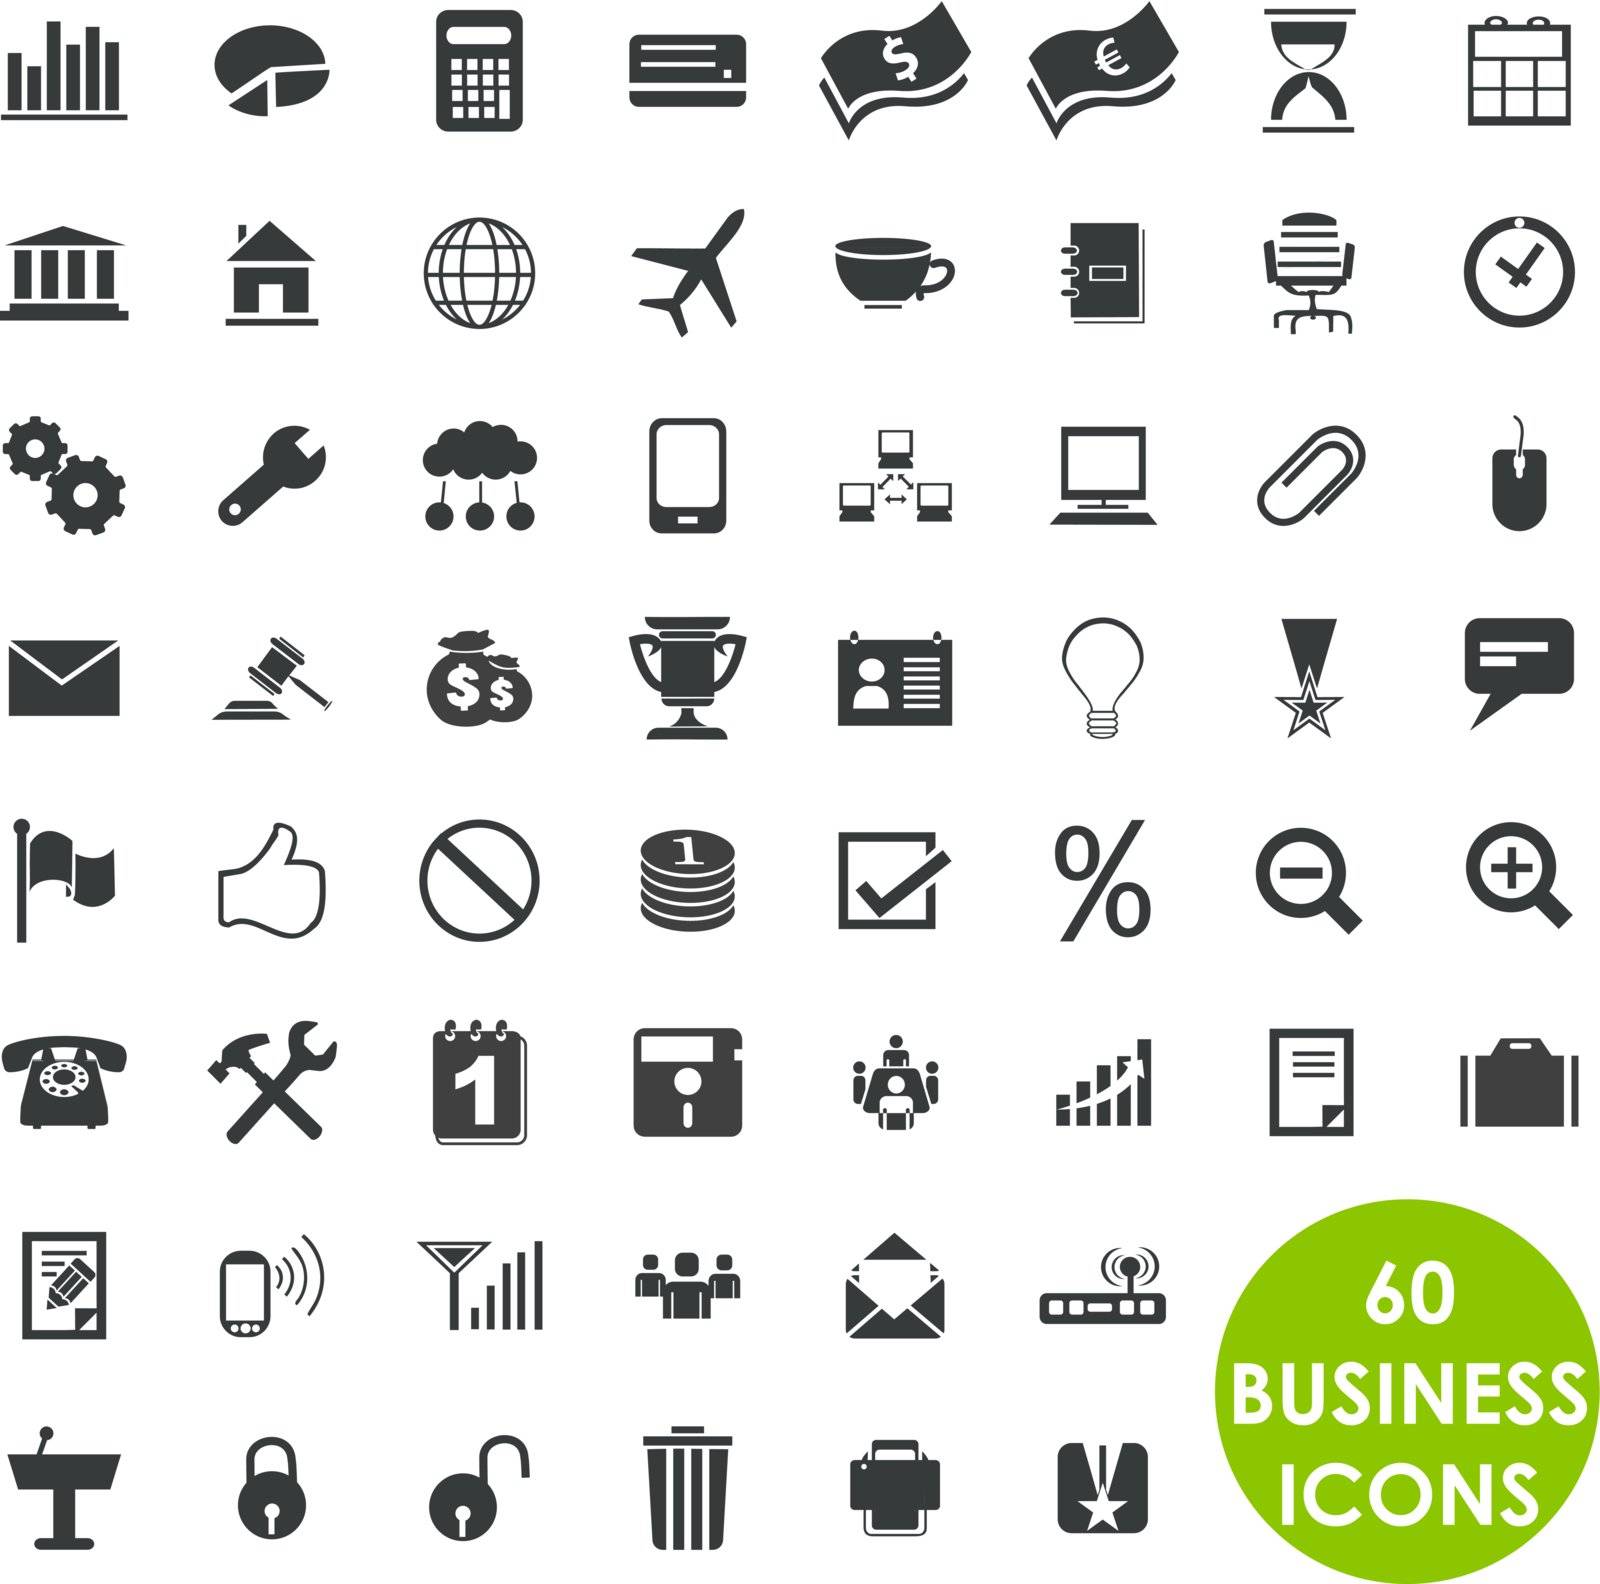 Isolated business icons. 60 of them